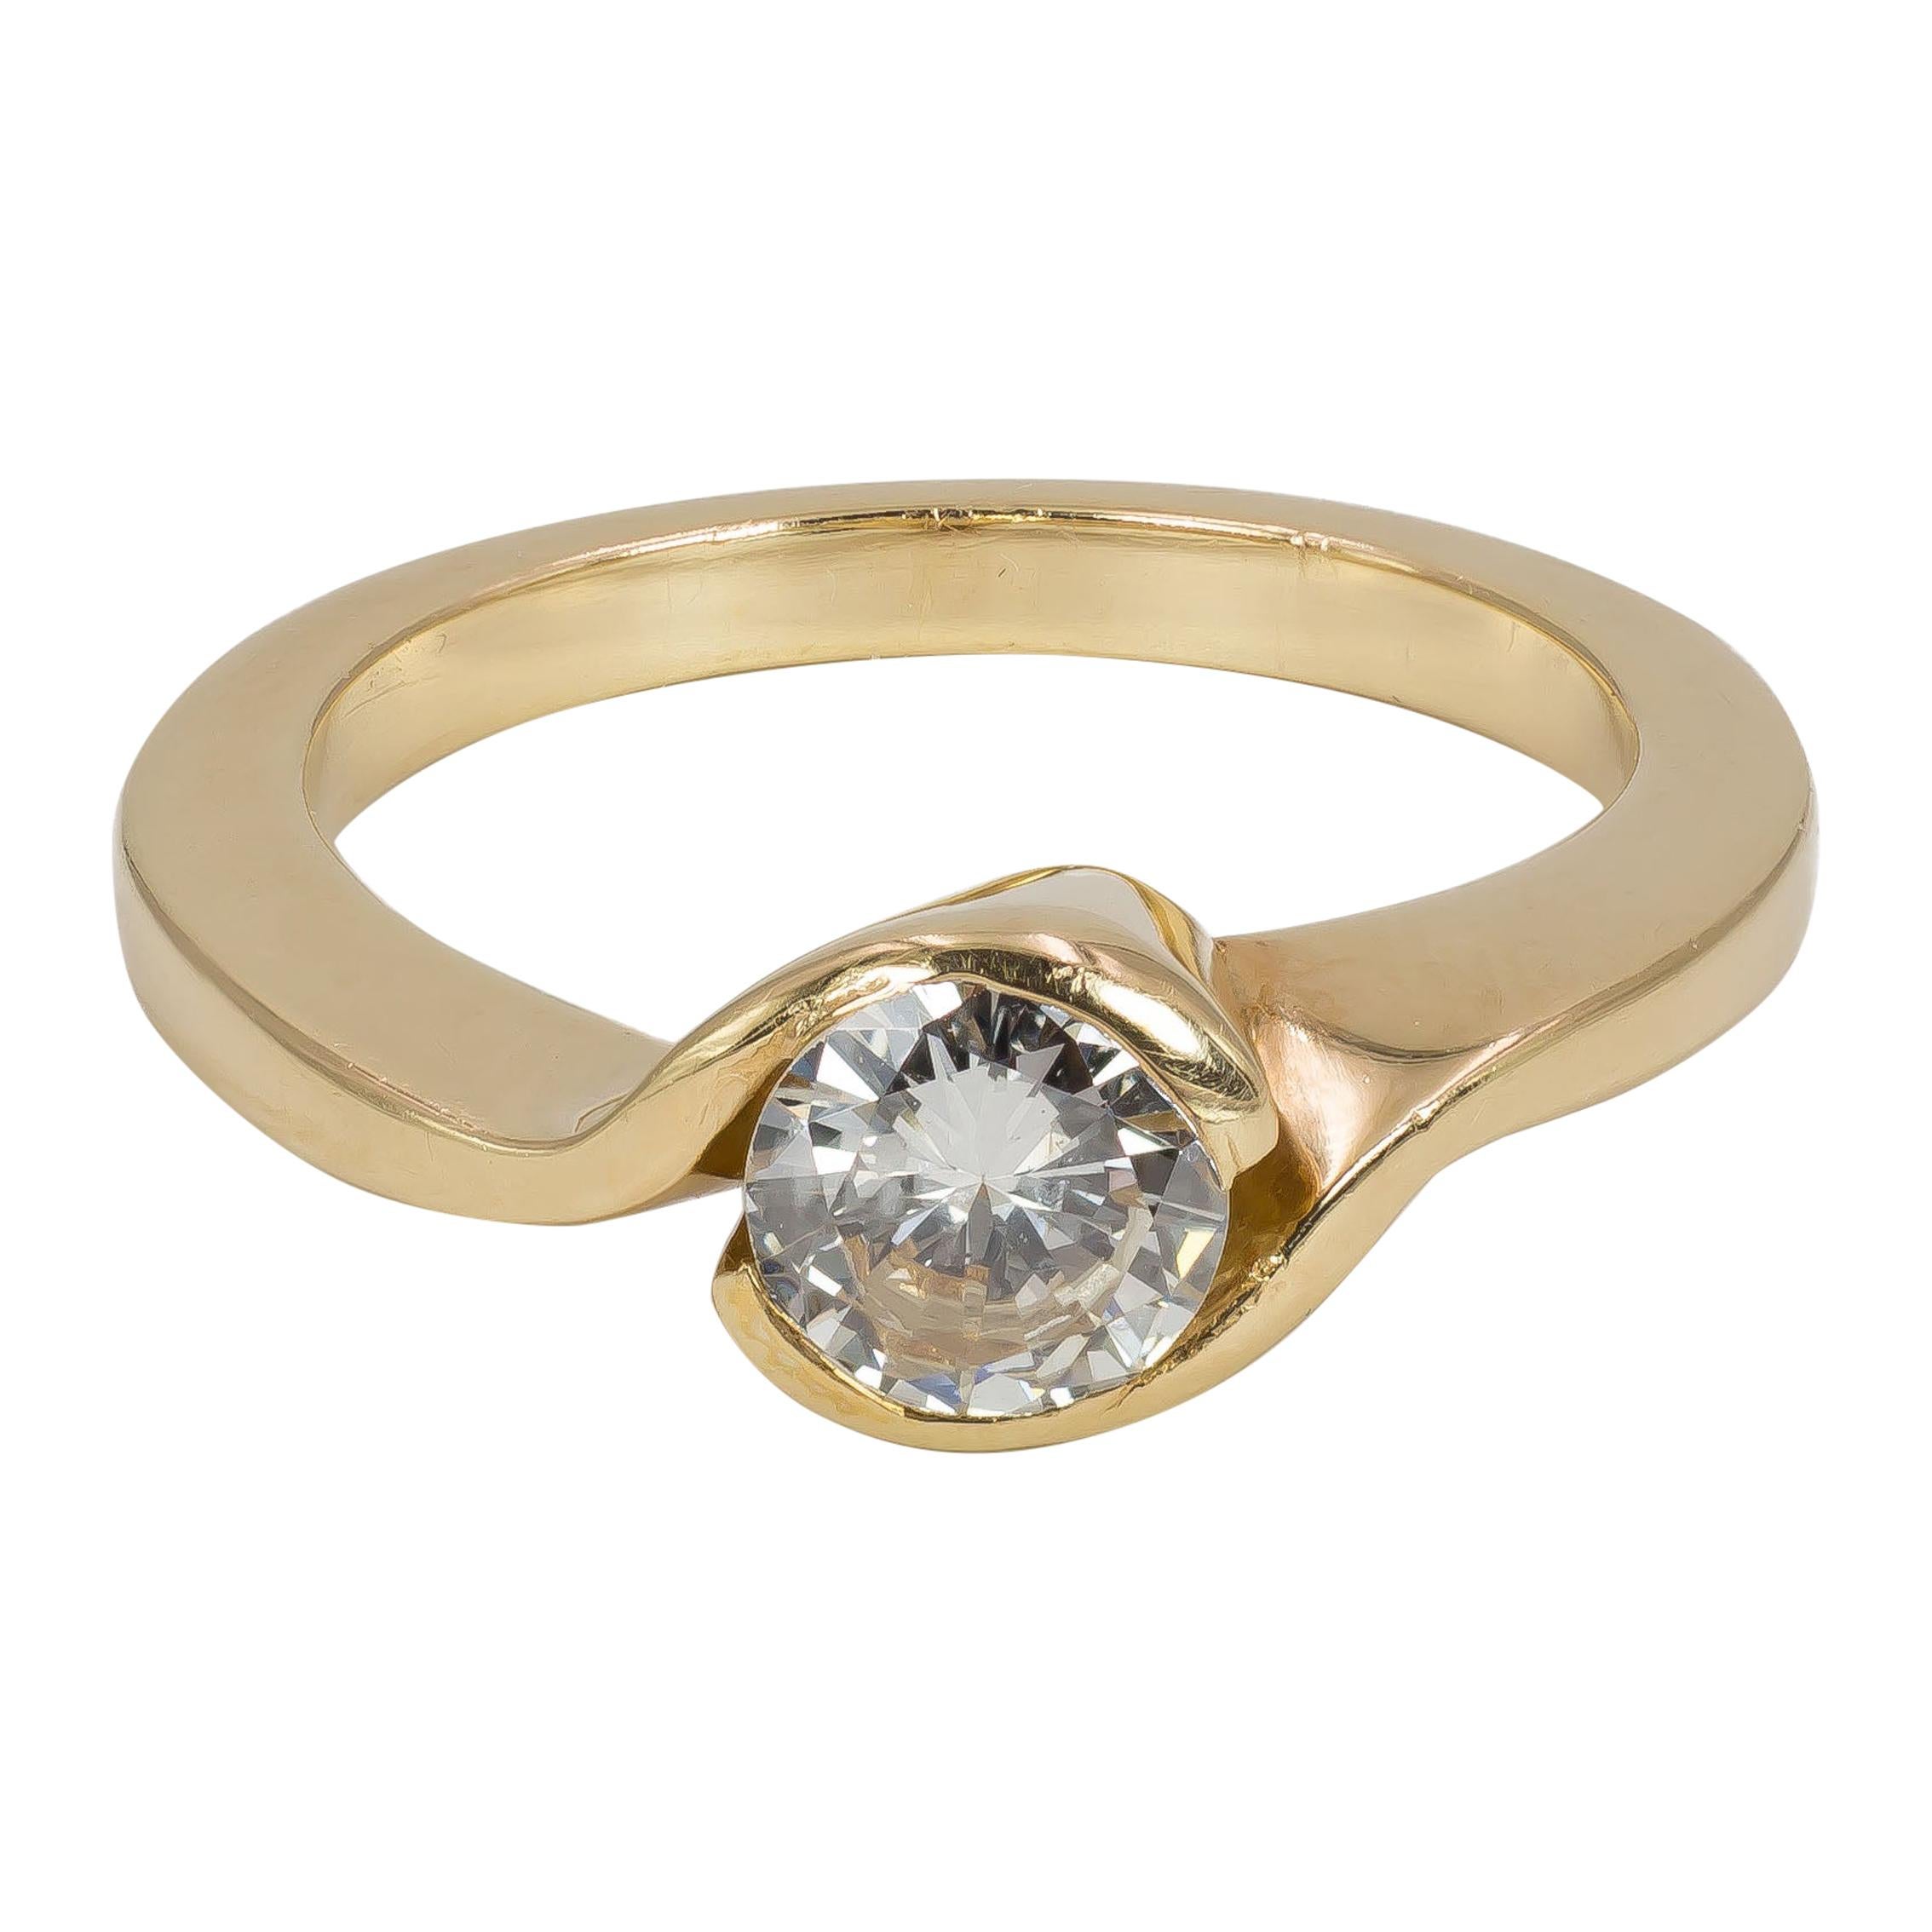 Vintage 18 Karat Gold and 0.7 Carat Round Cut Diamond Solitaire Ring, 1970s For Sale